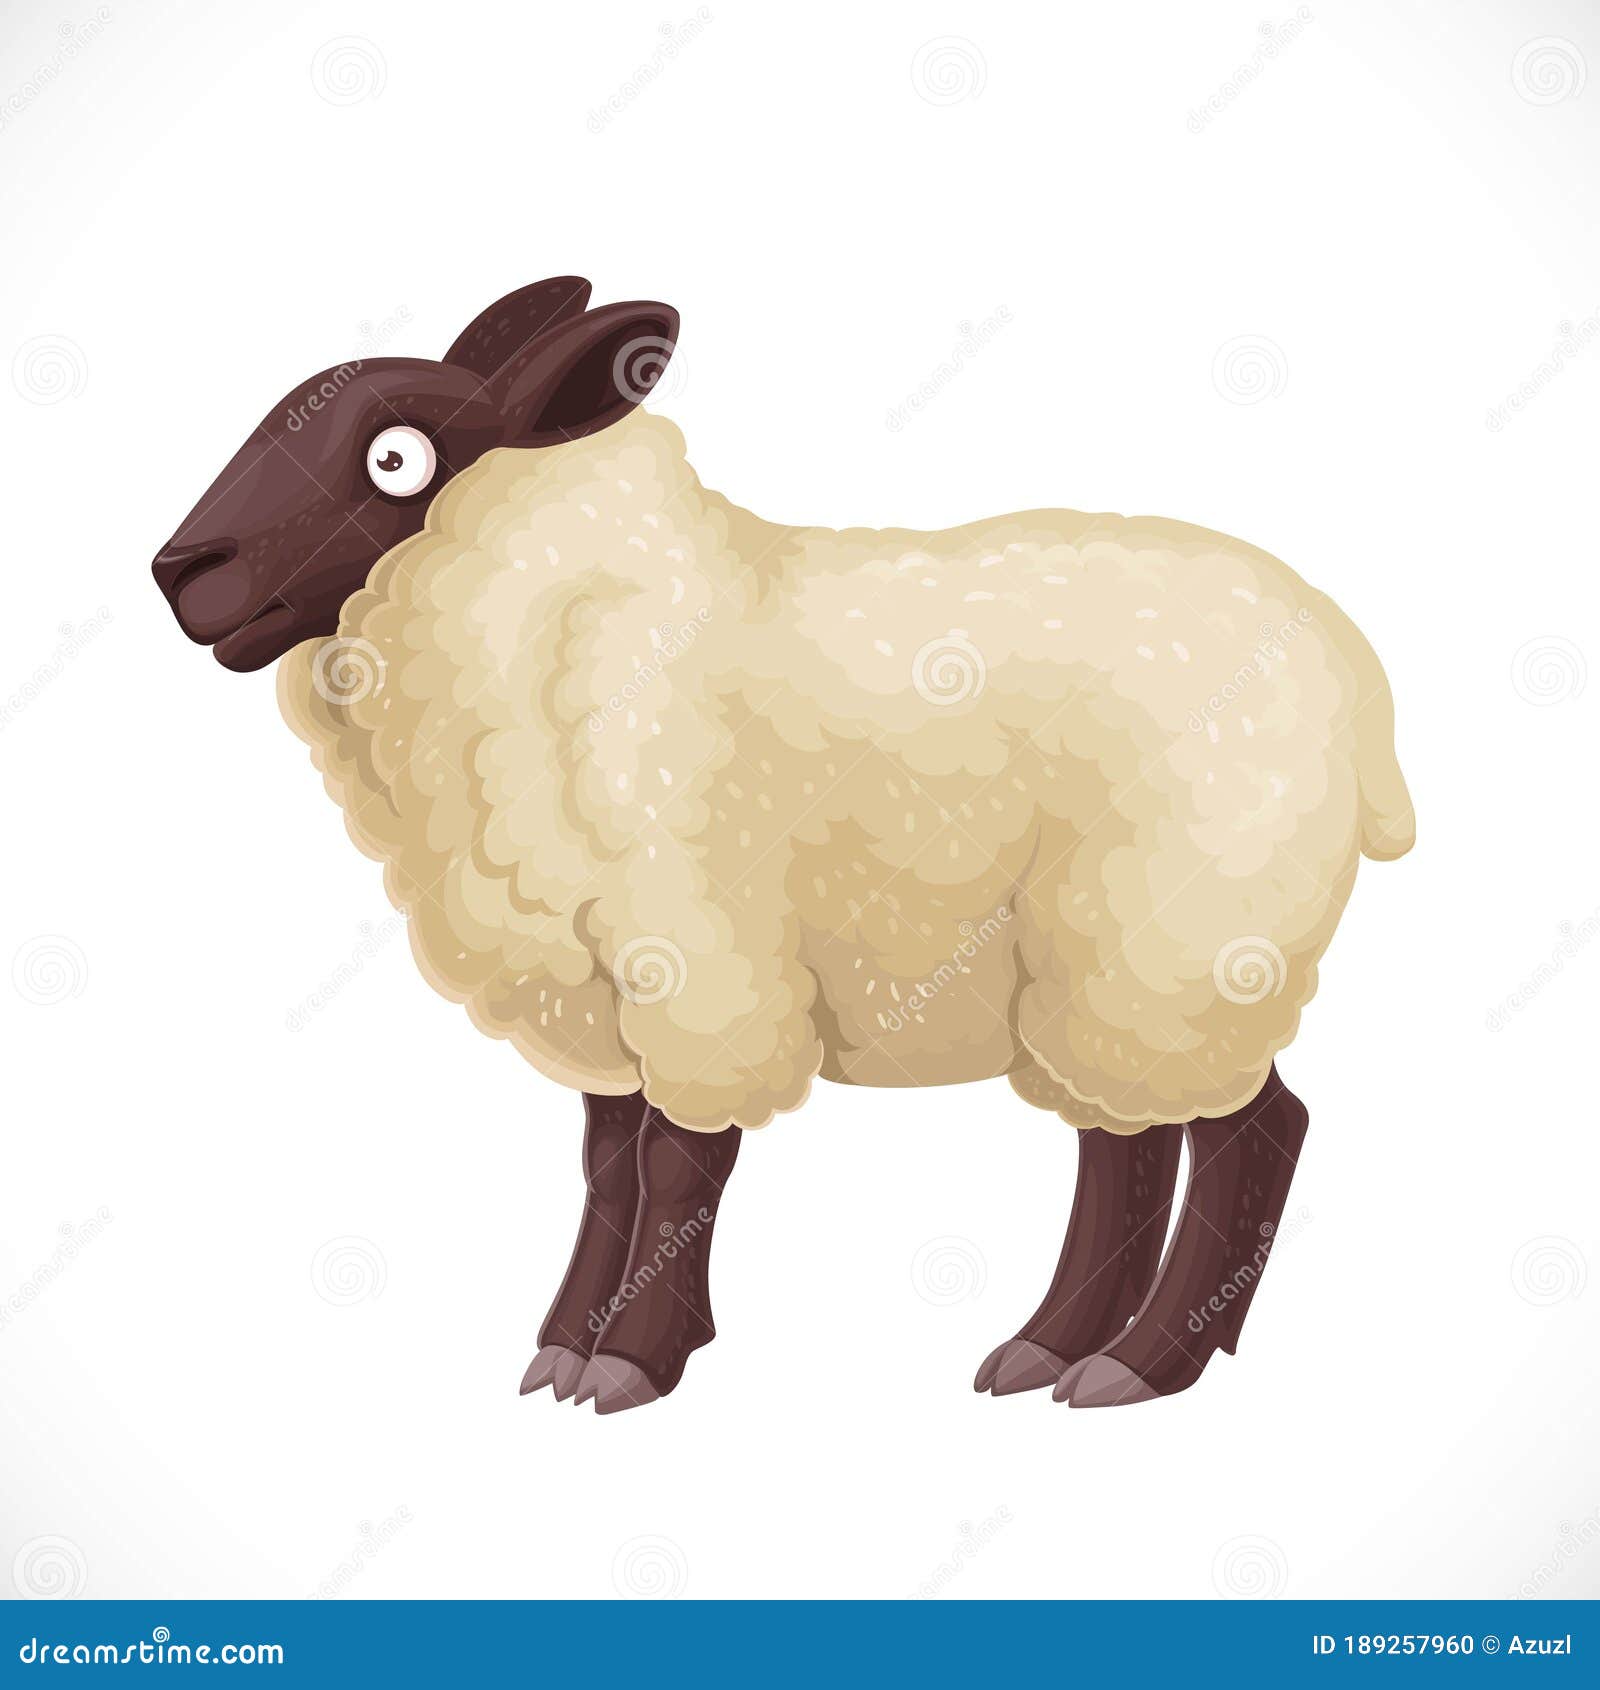 Cute Woolly Sheep With Light Wool Isolated On White Background Stock ...